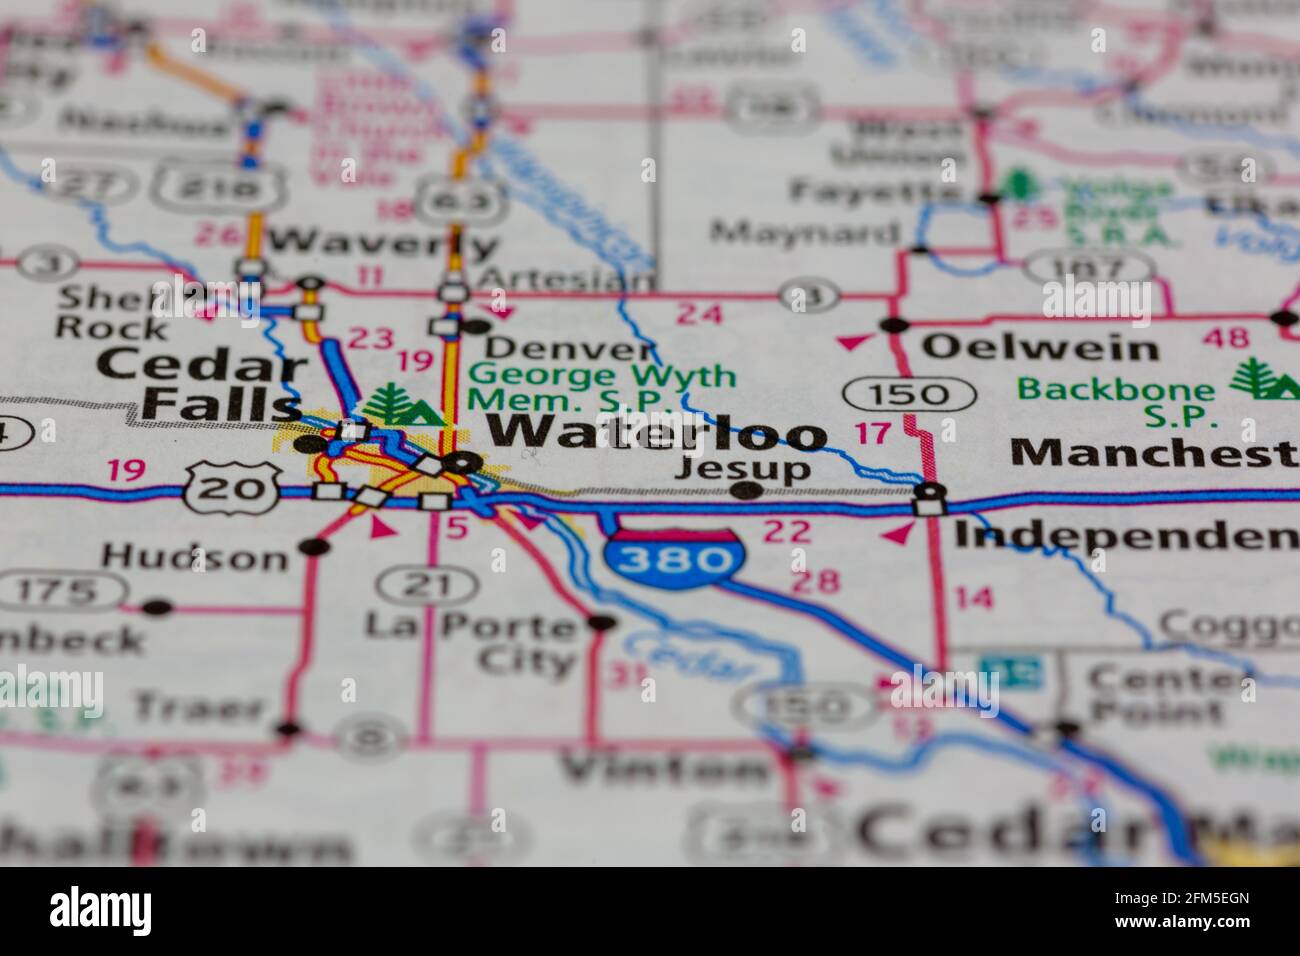 Waterloo Iowa USA Shown on a Geography map or road map Stock Photo